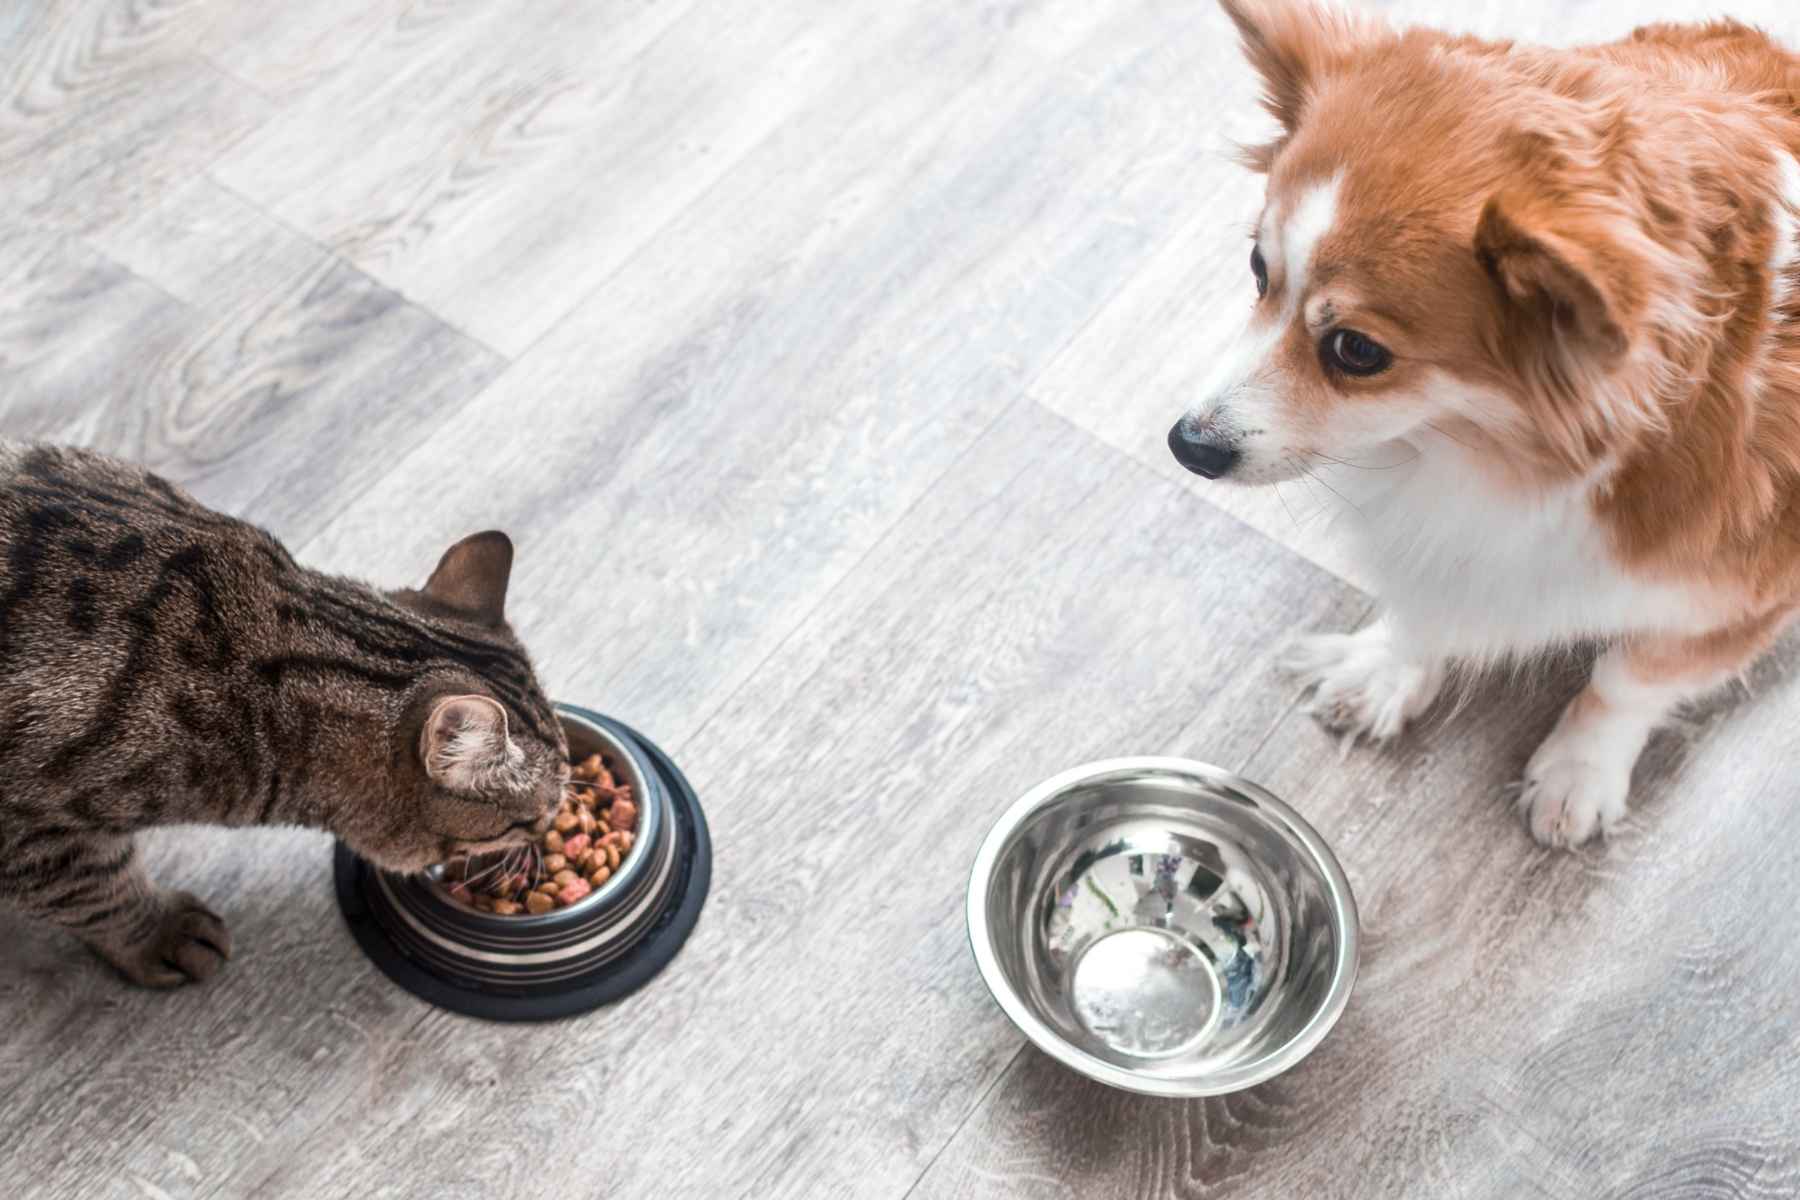 Cat eating dog food from the dog's bowl